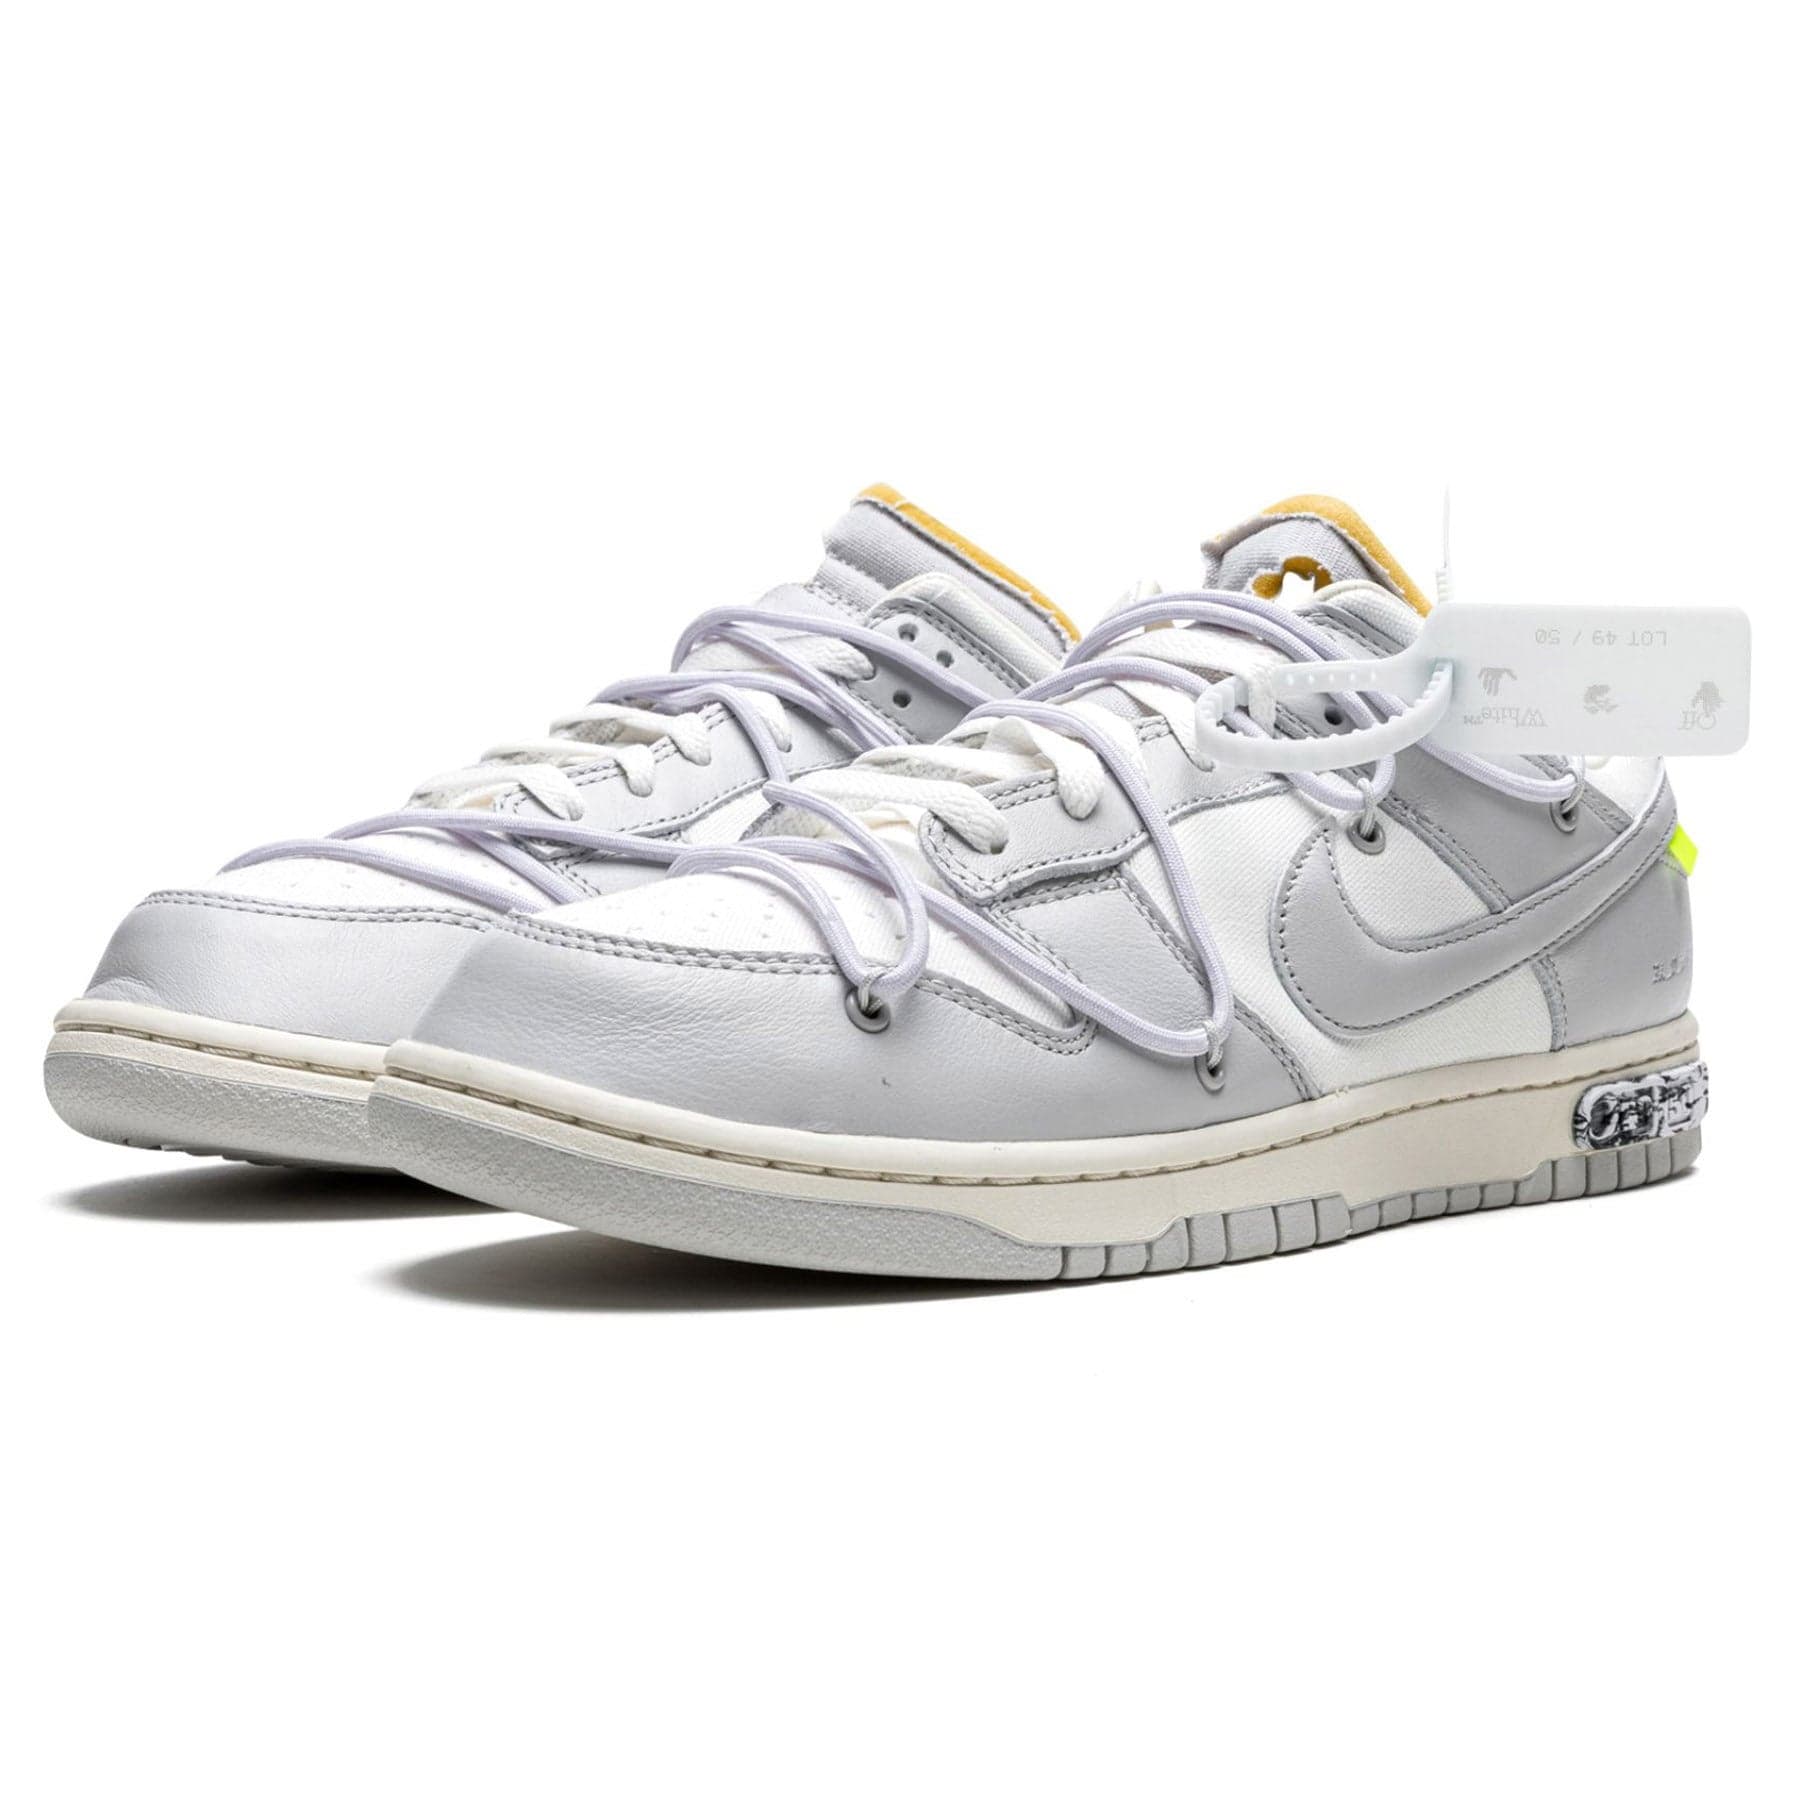 OFF-WHITE NIKE DUNK LOW 1 OF 50 “49” - スニーカー